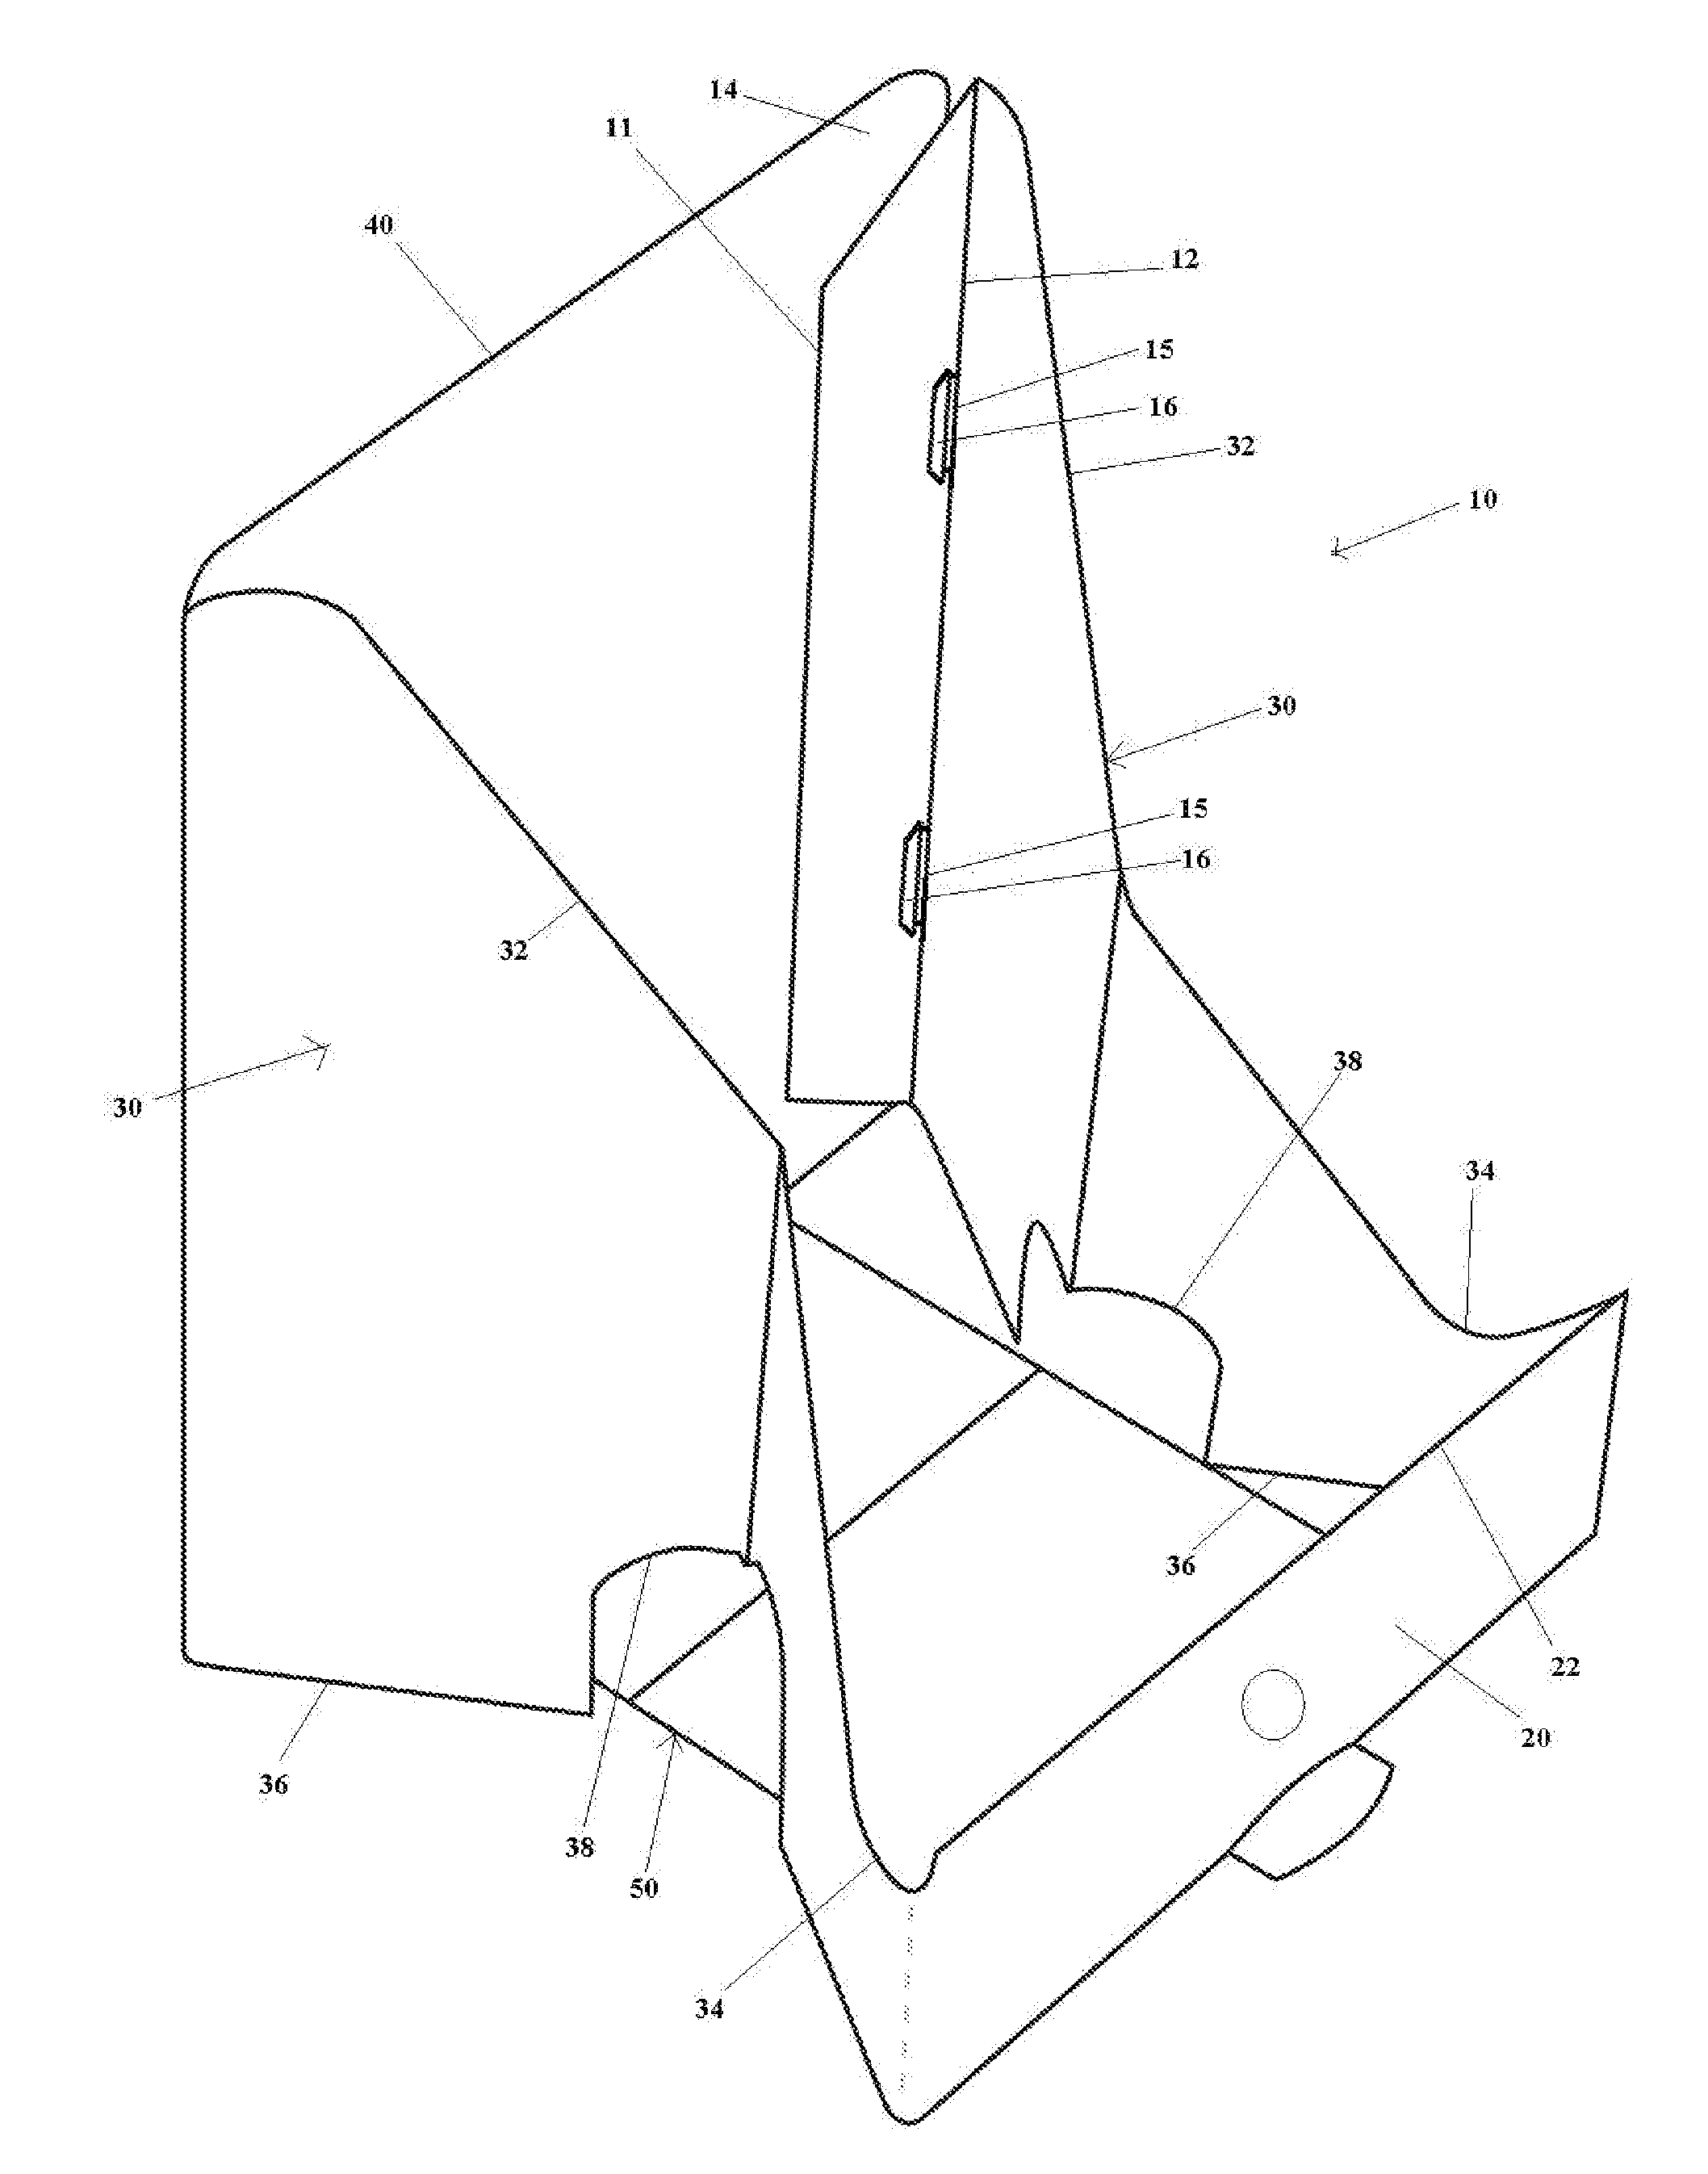 Collapsible stand for supporting a portable electronic device